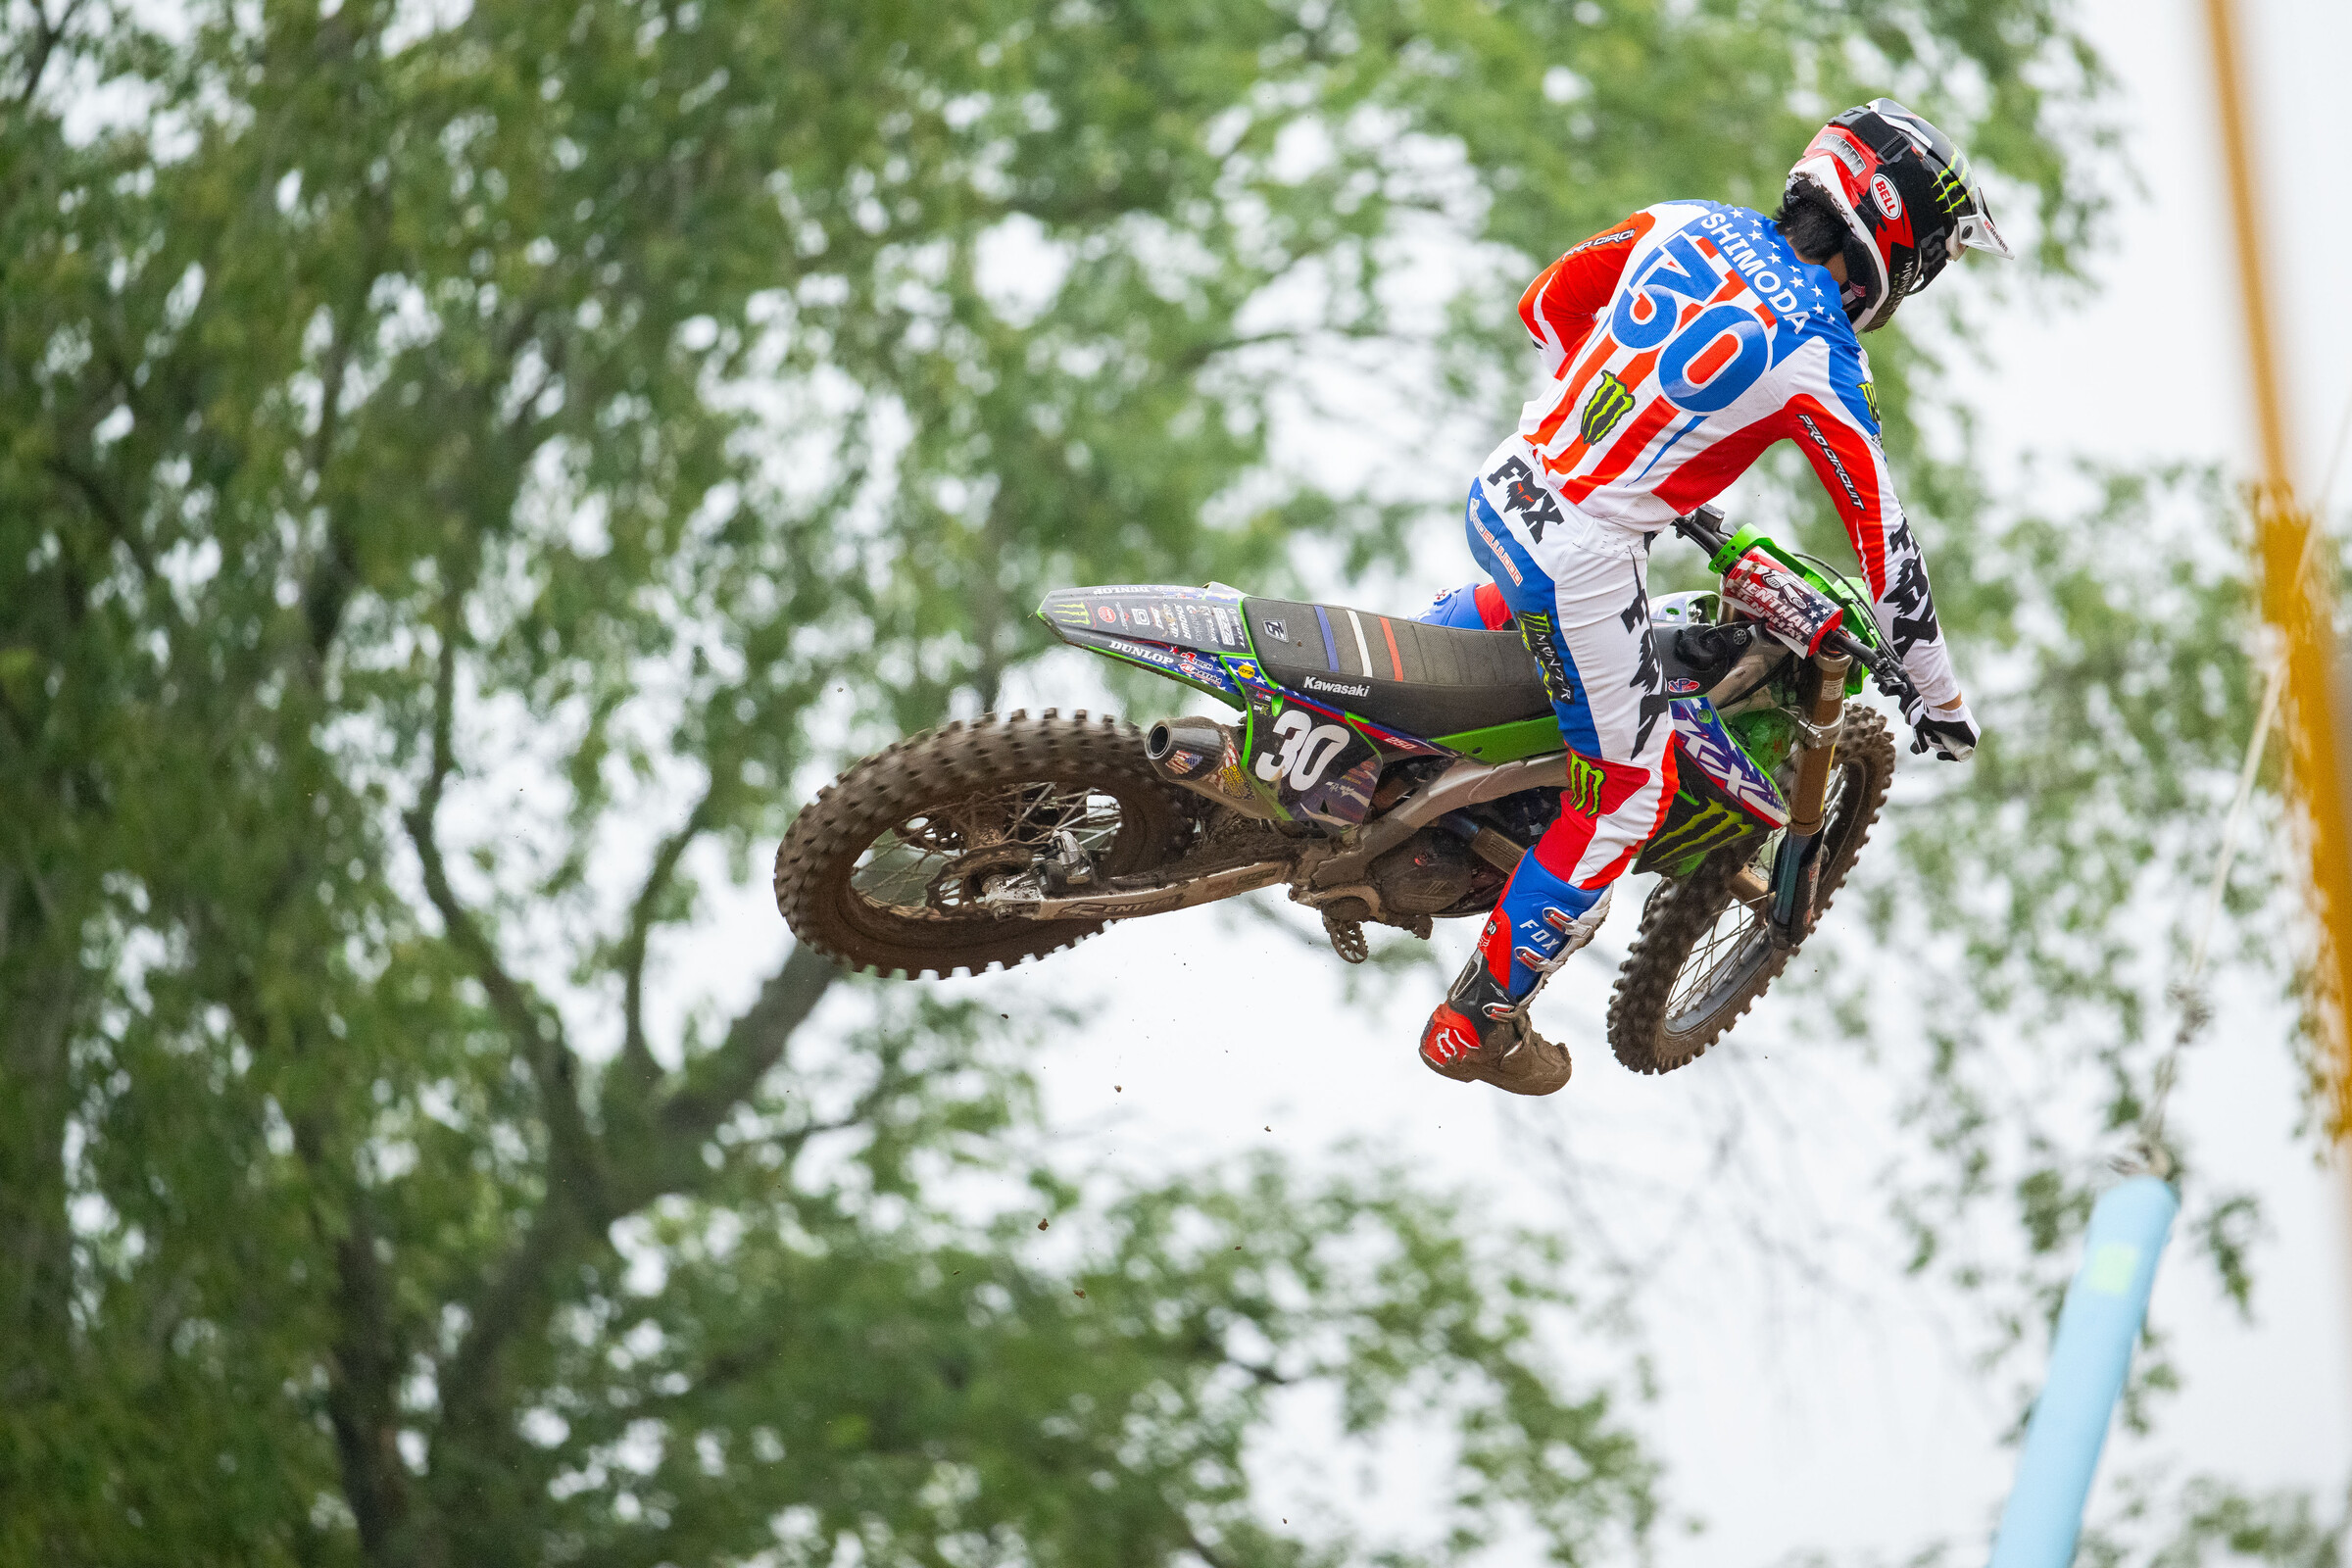 How to Watch/Stream 2023 Southwick National on TV